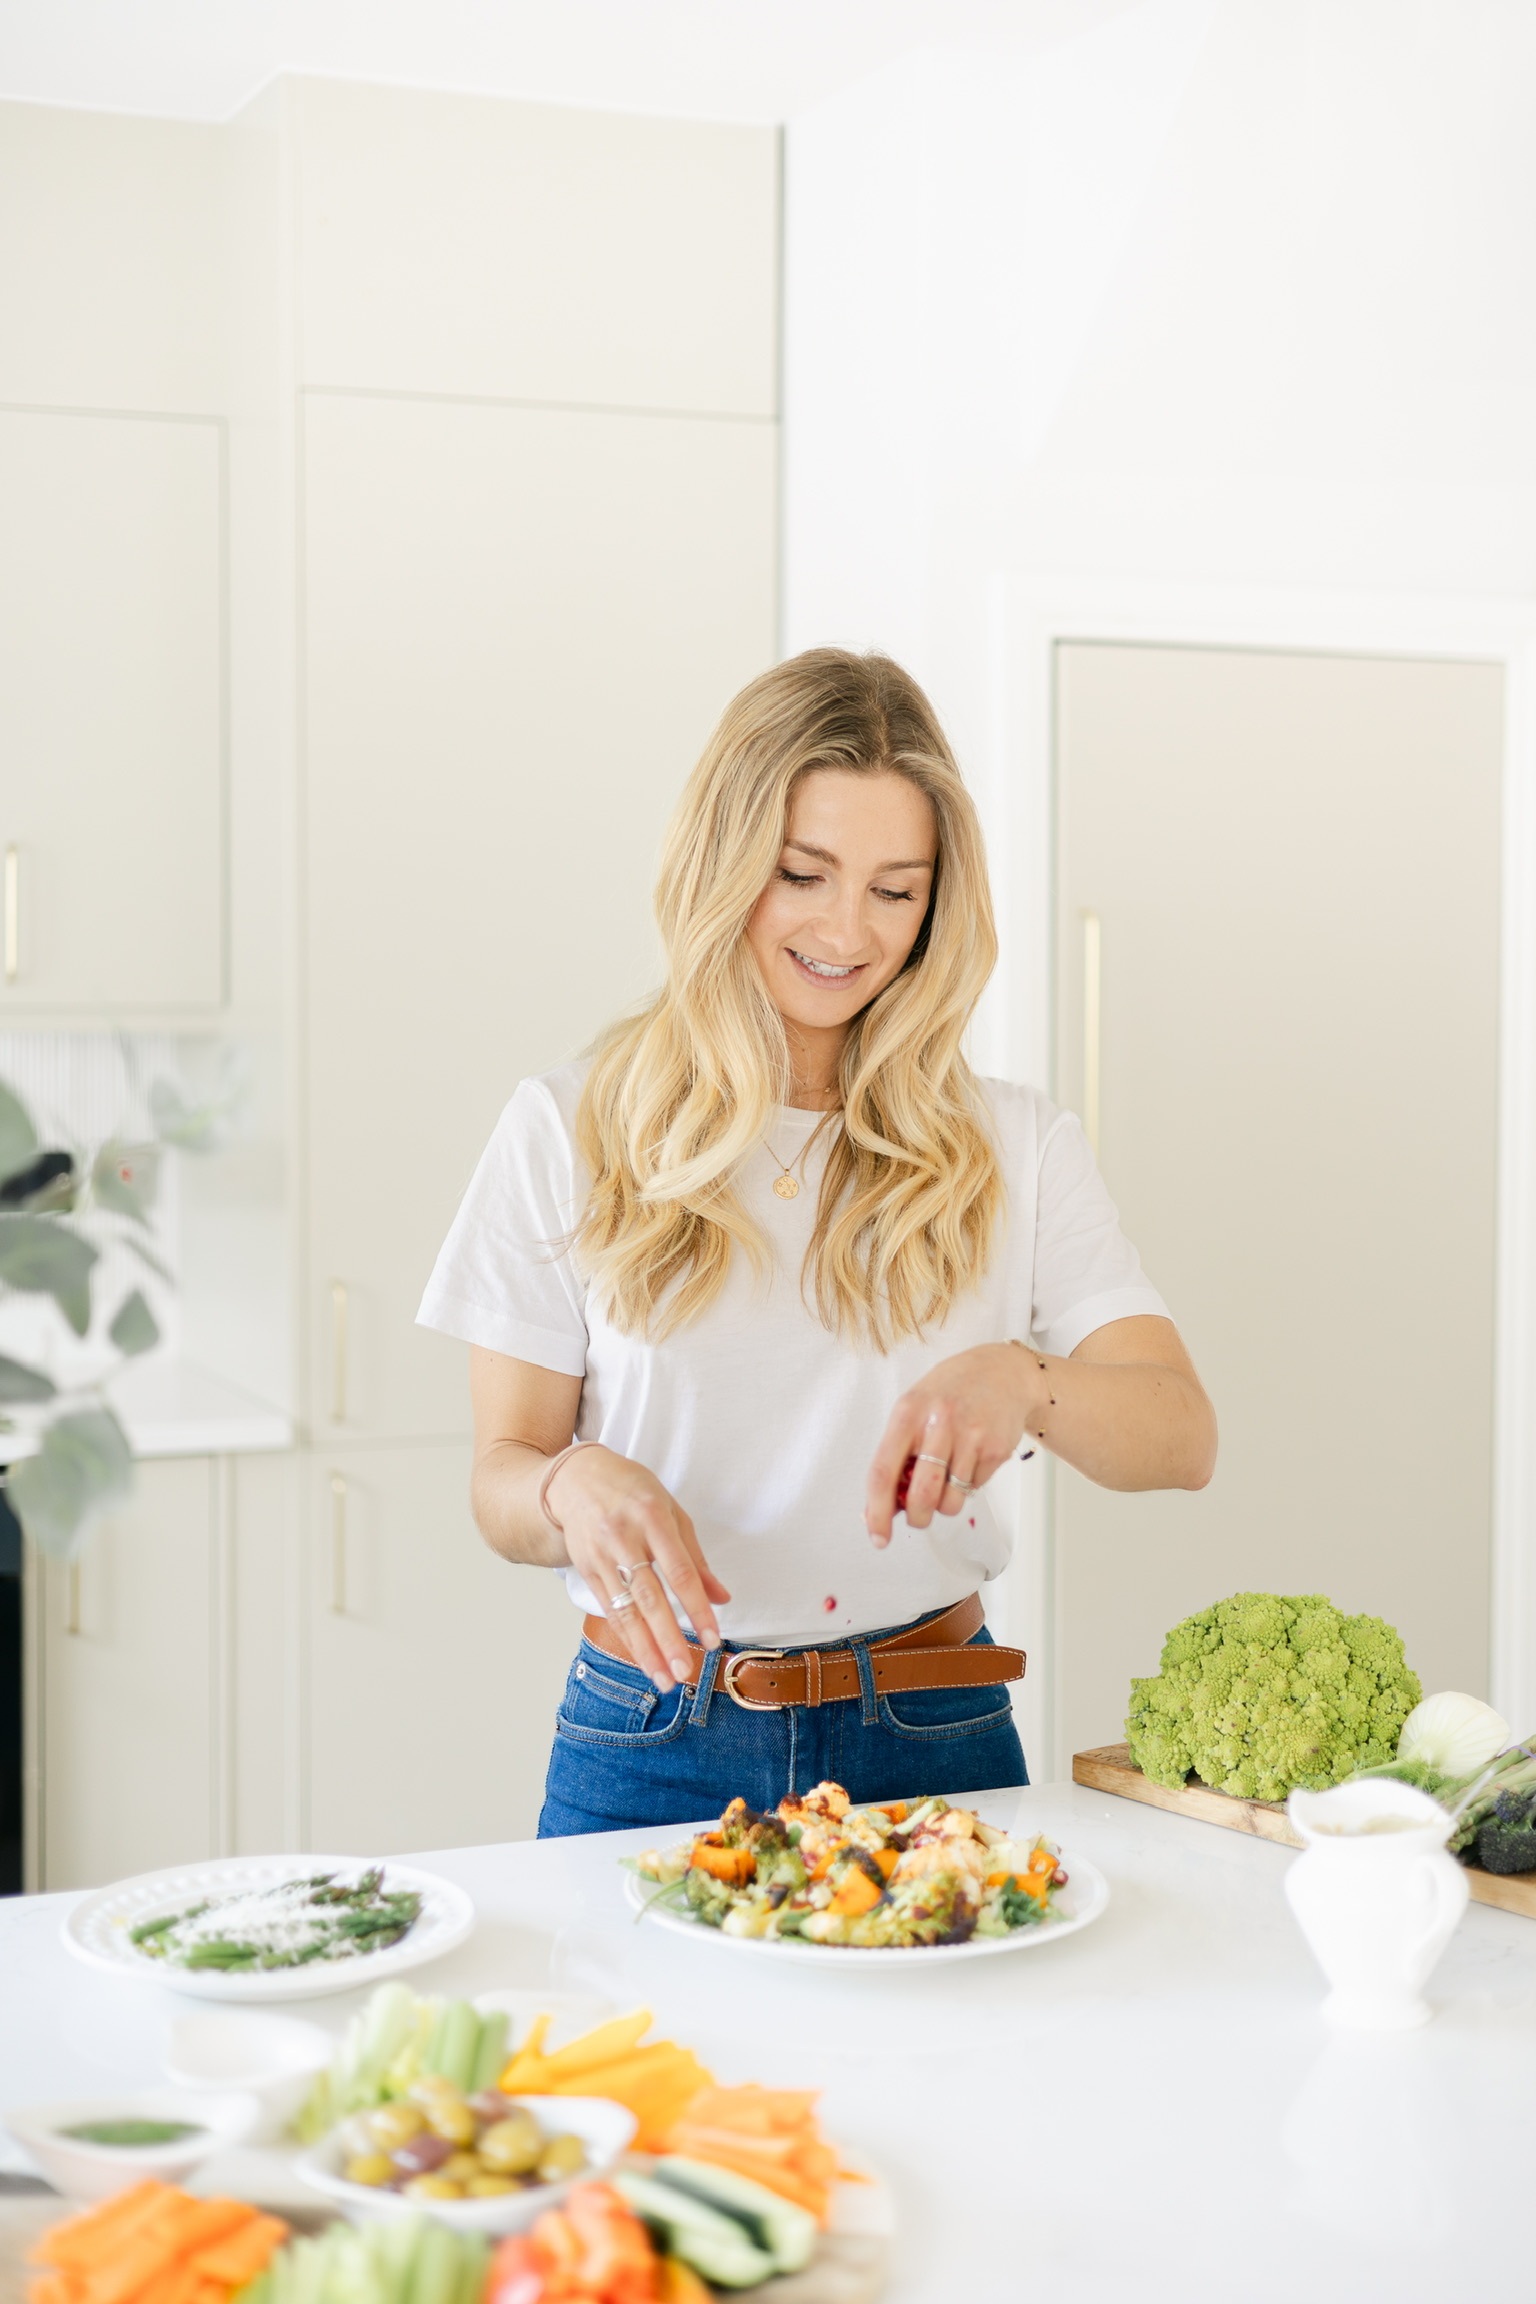 What to expect on the Summer Kickstart with nutritional therapist Jessica May